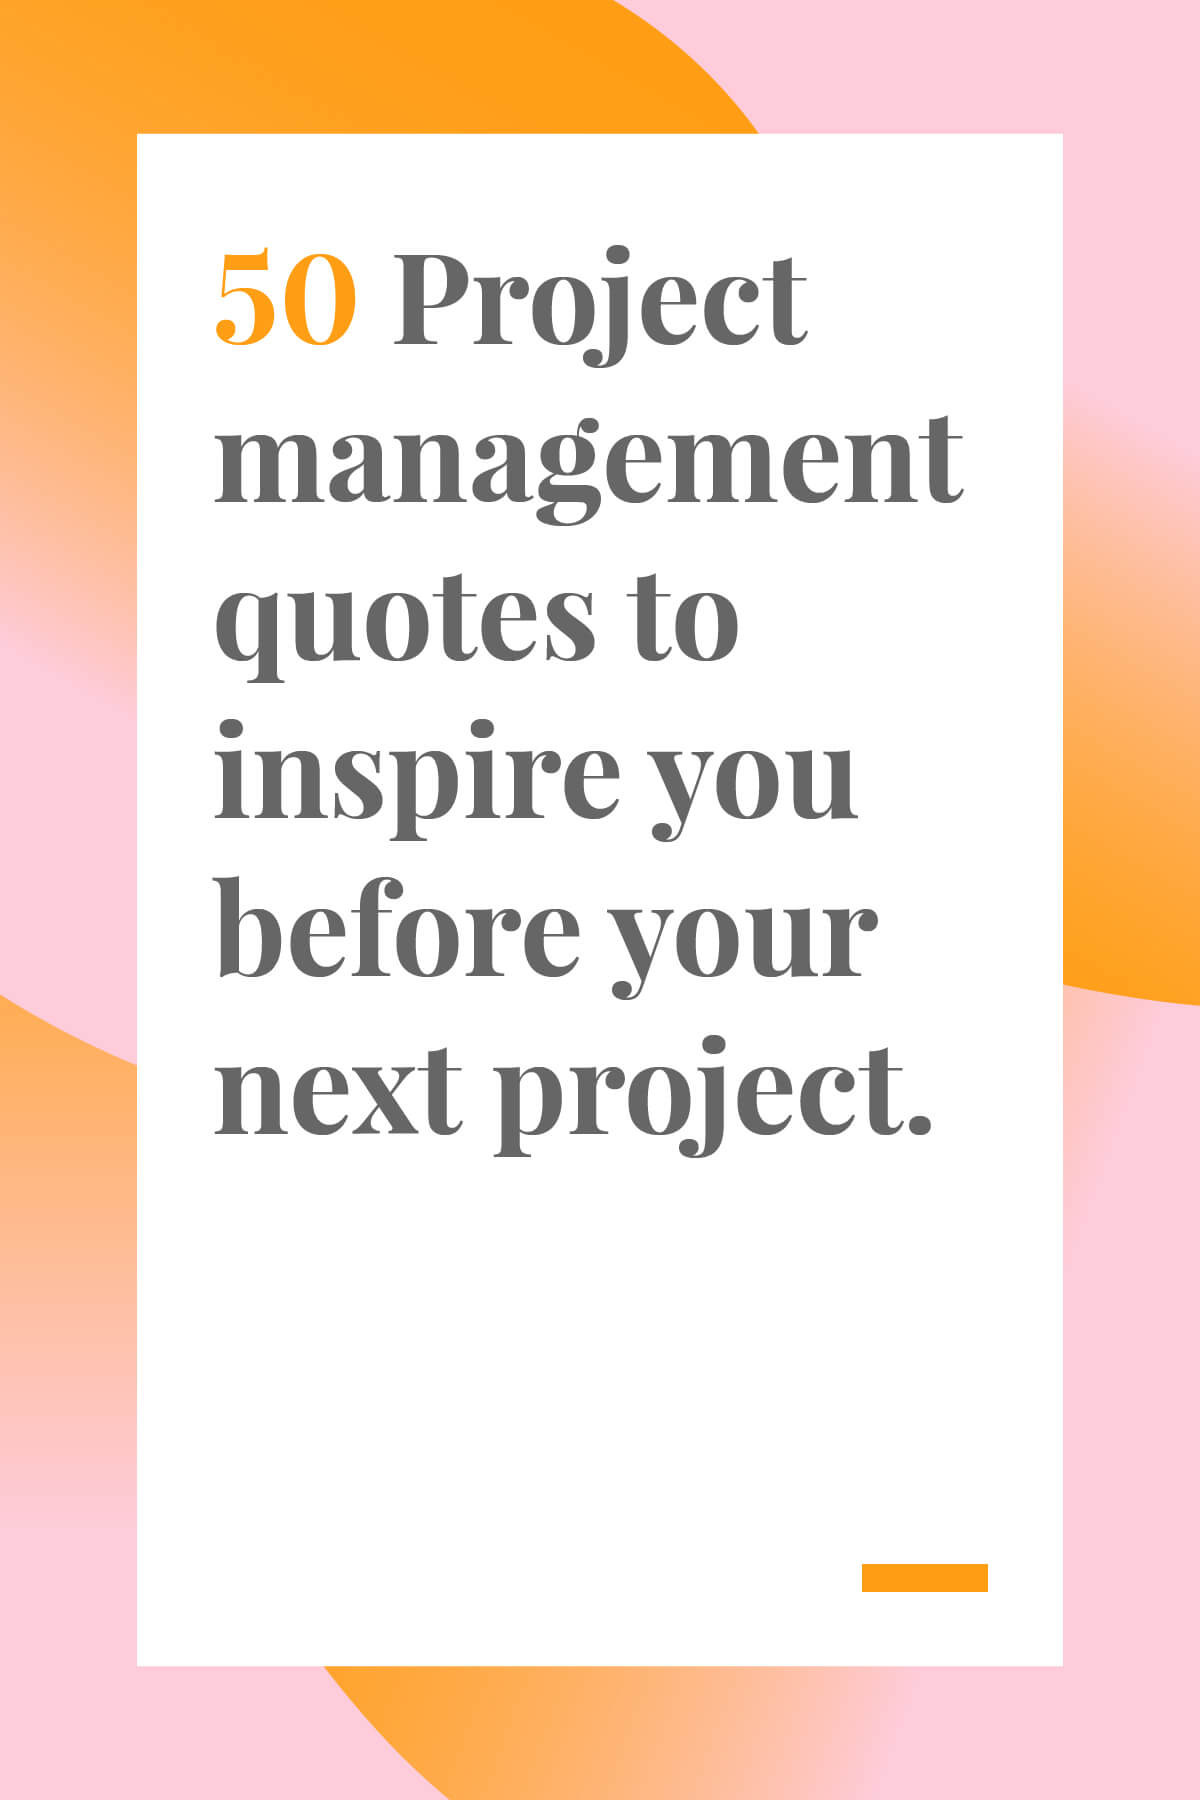 Motivational Quotes For Managers
 50 Project Management Quotes to Inspire You Before Your